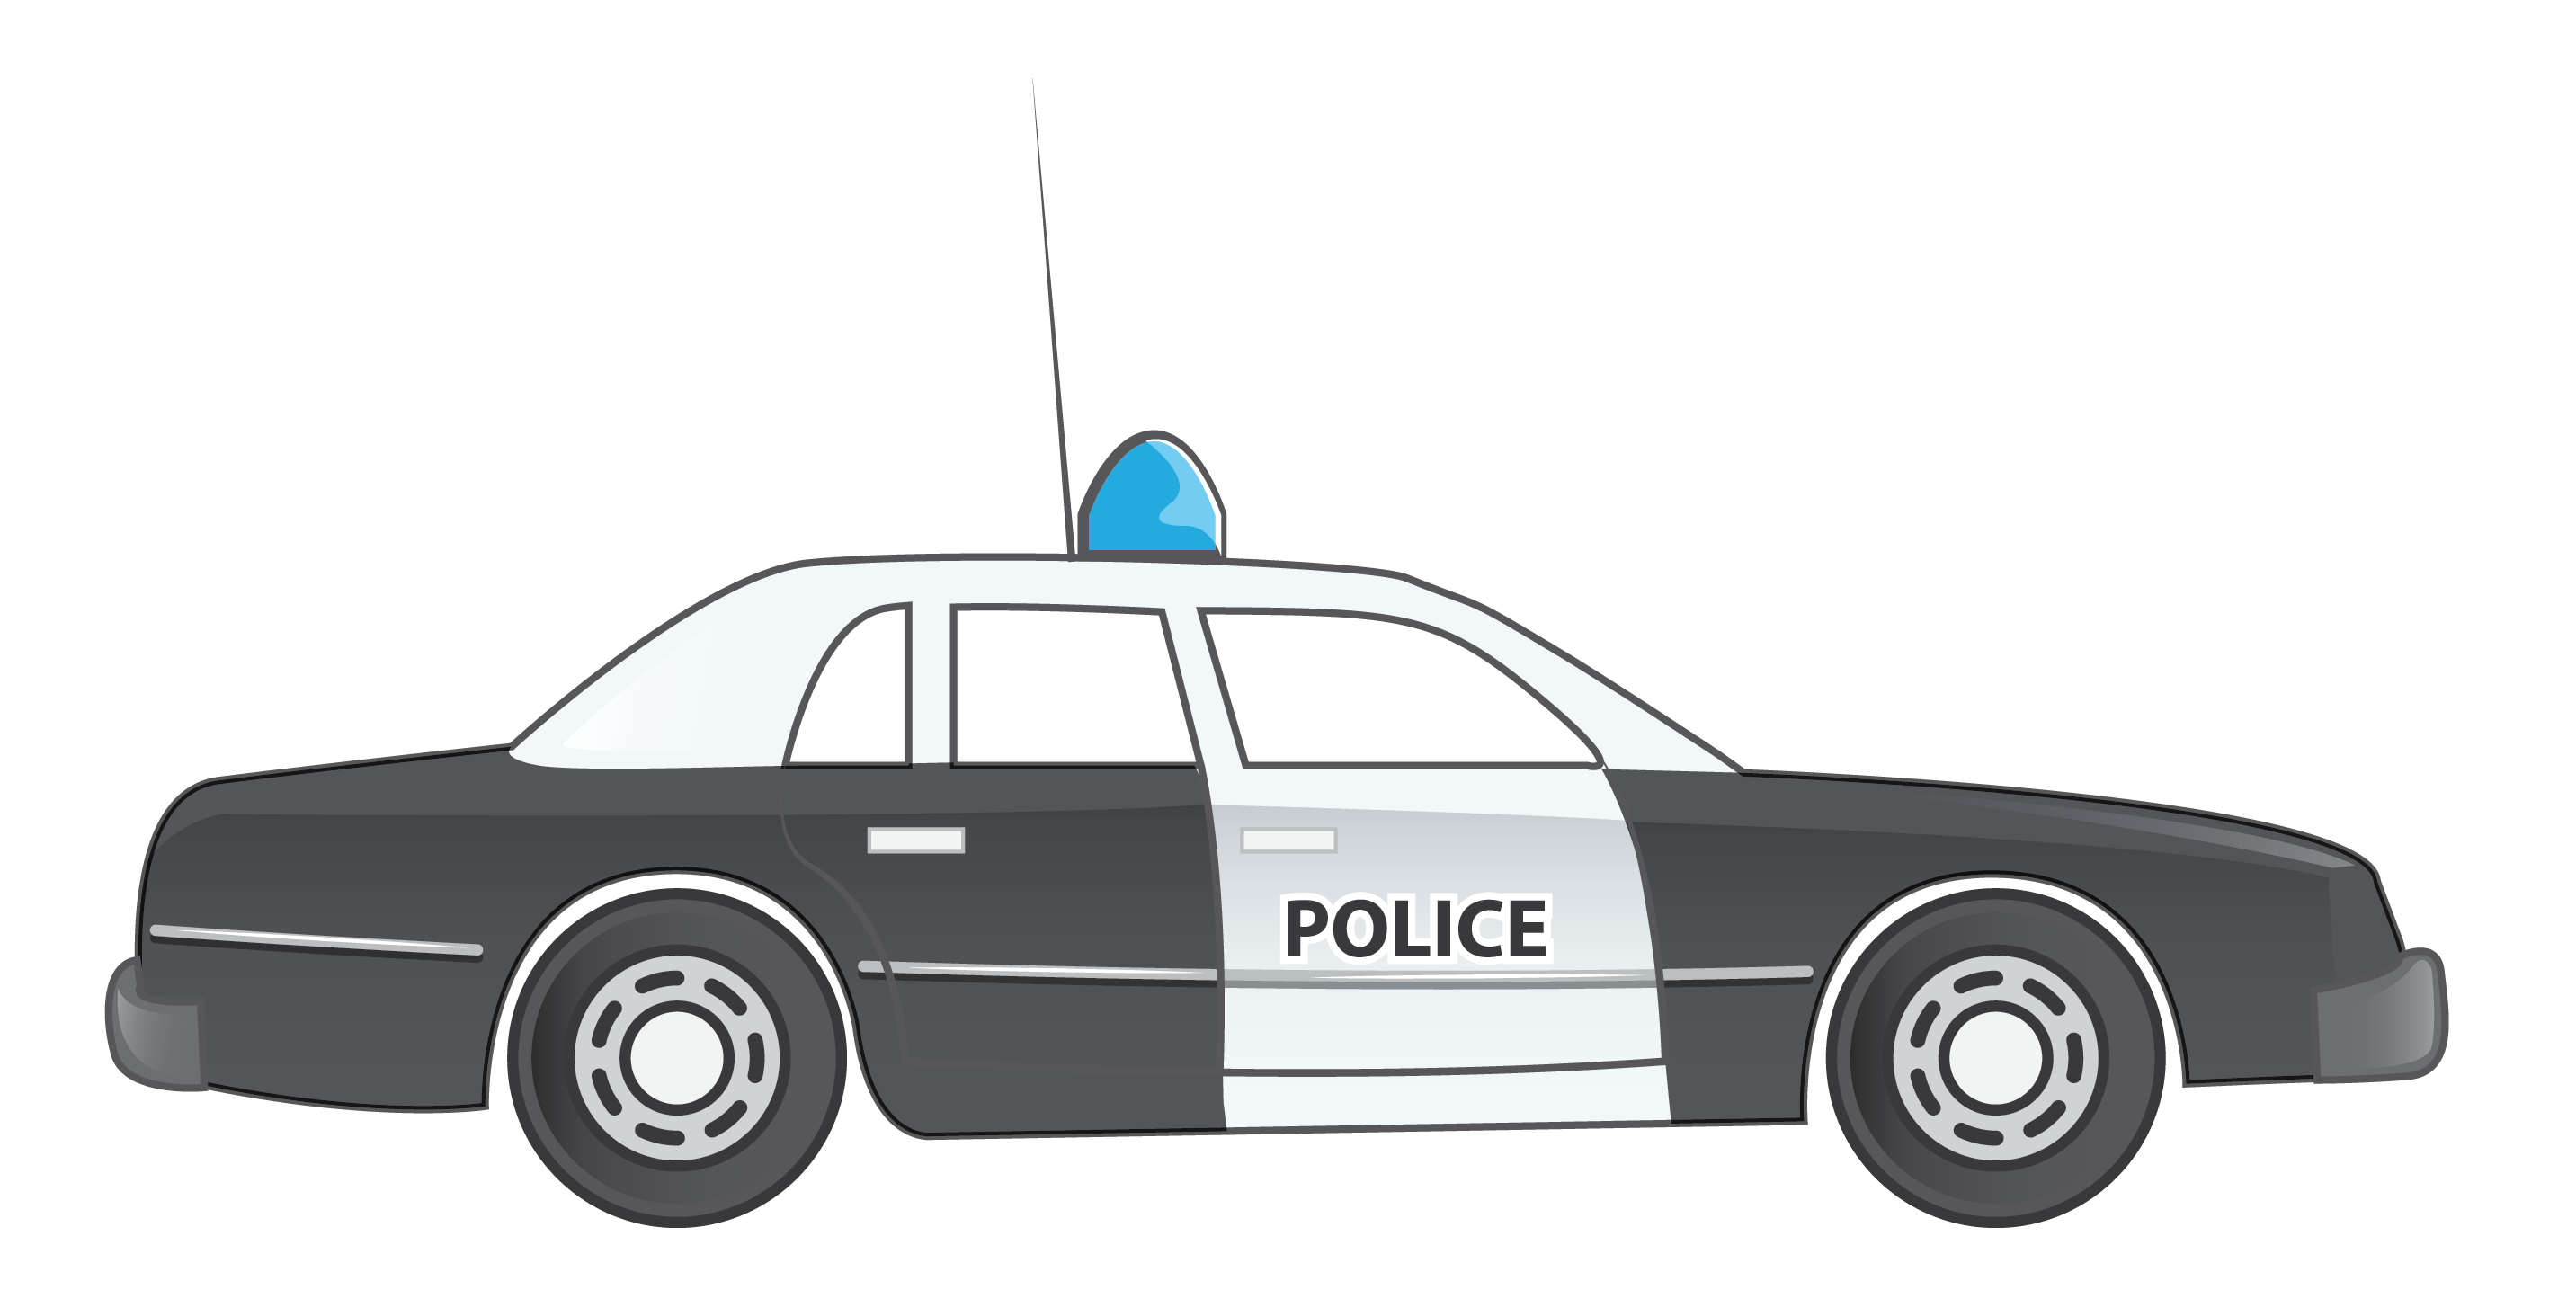 Police car free to use clipart 2